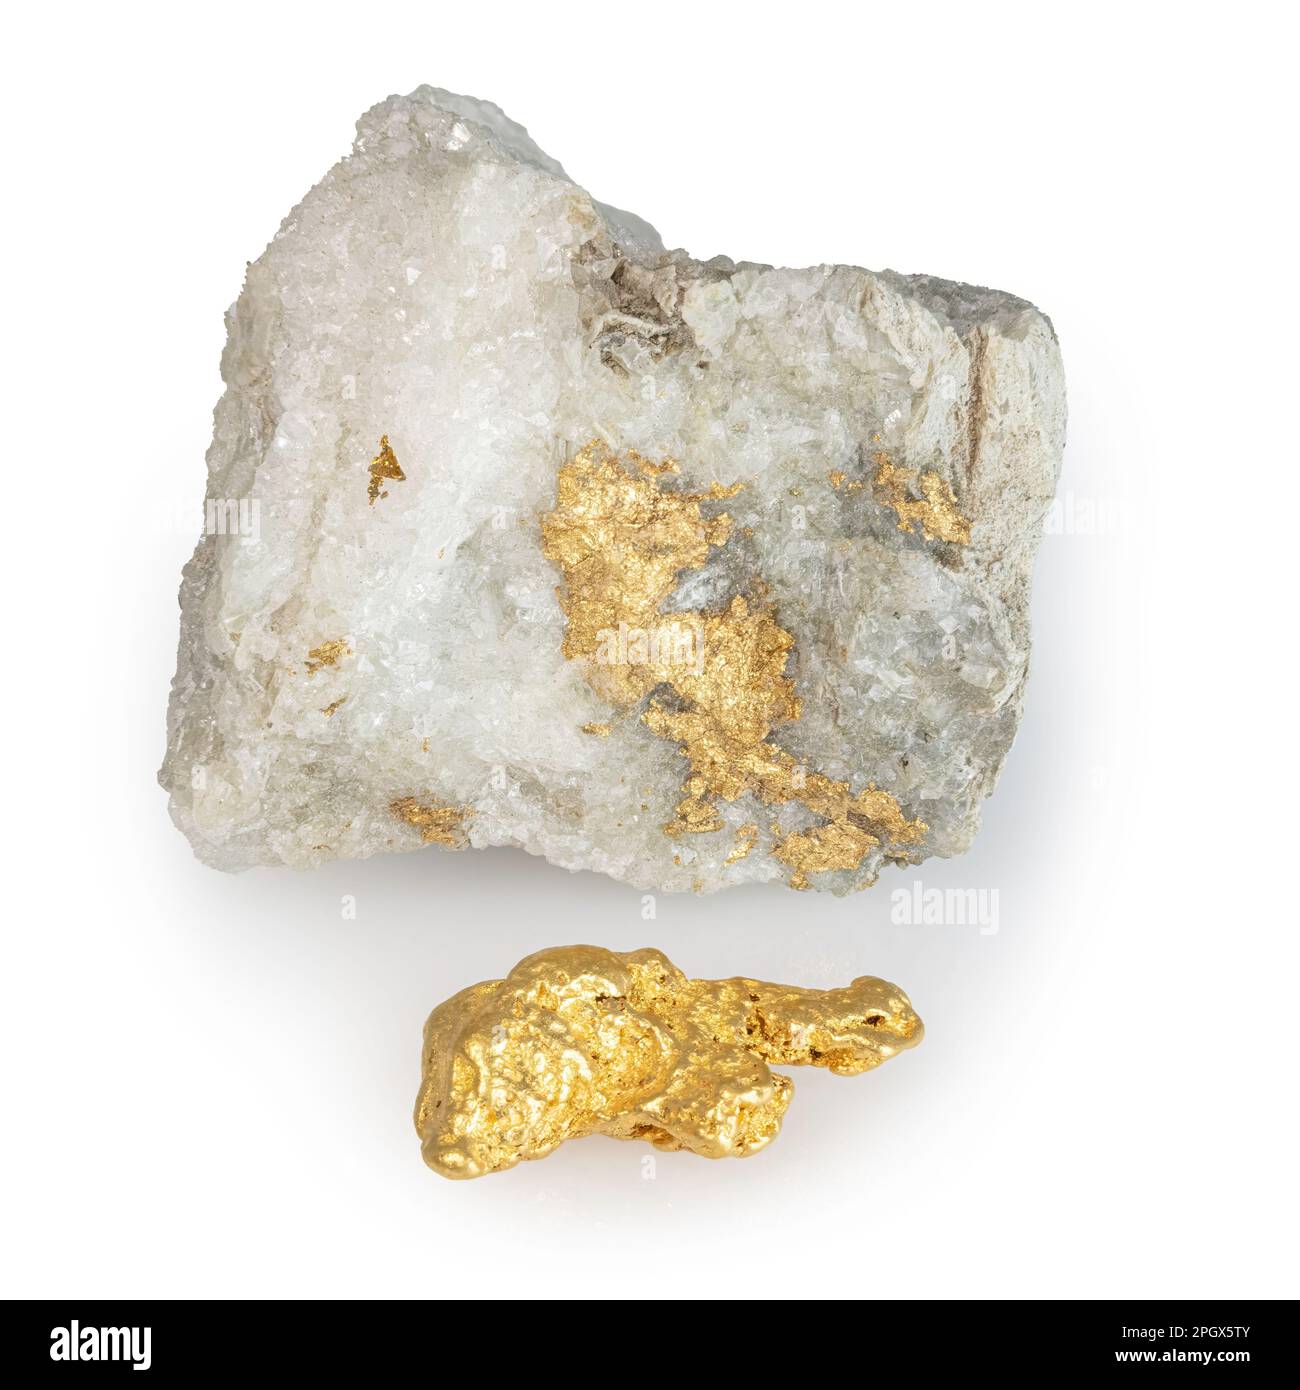 Gold on quartz and gold nugget on white background Stock Photo